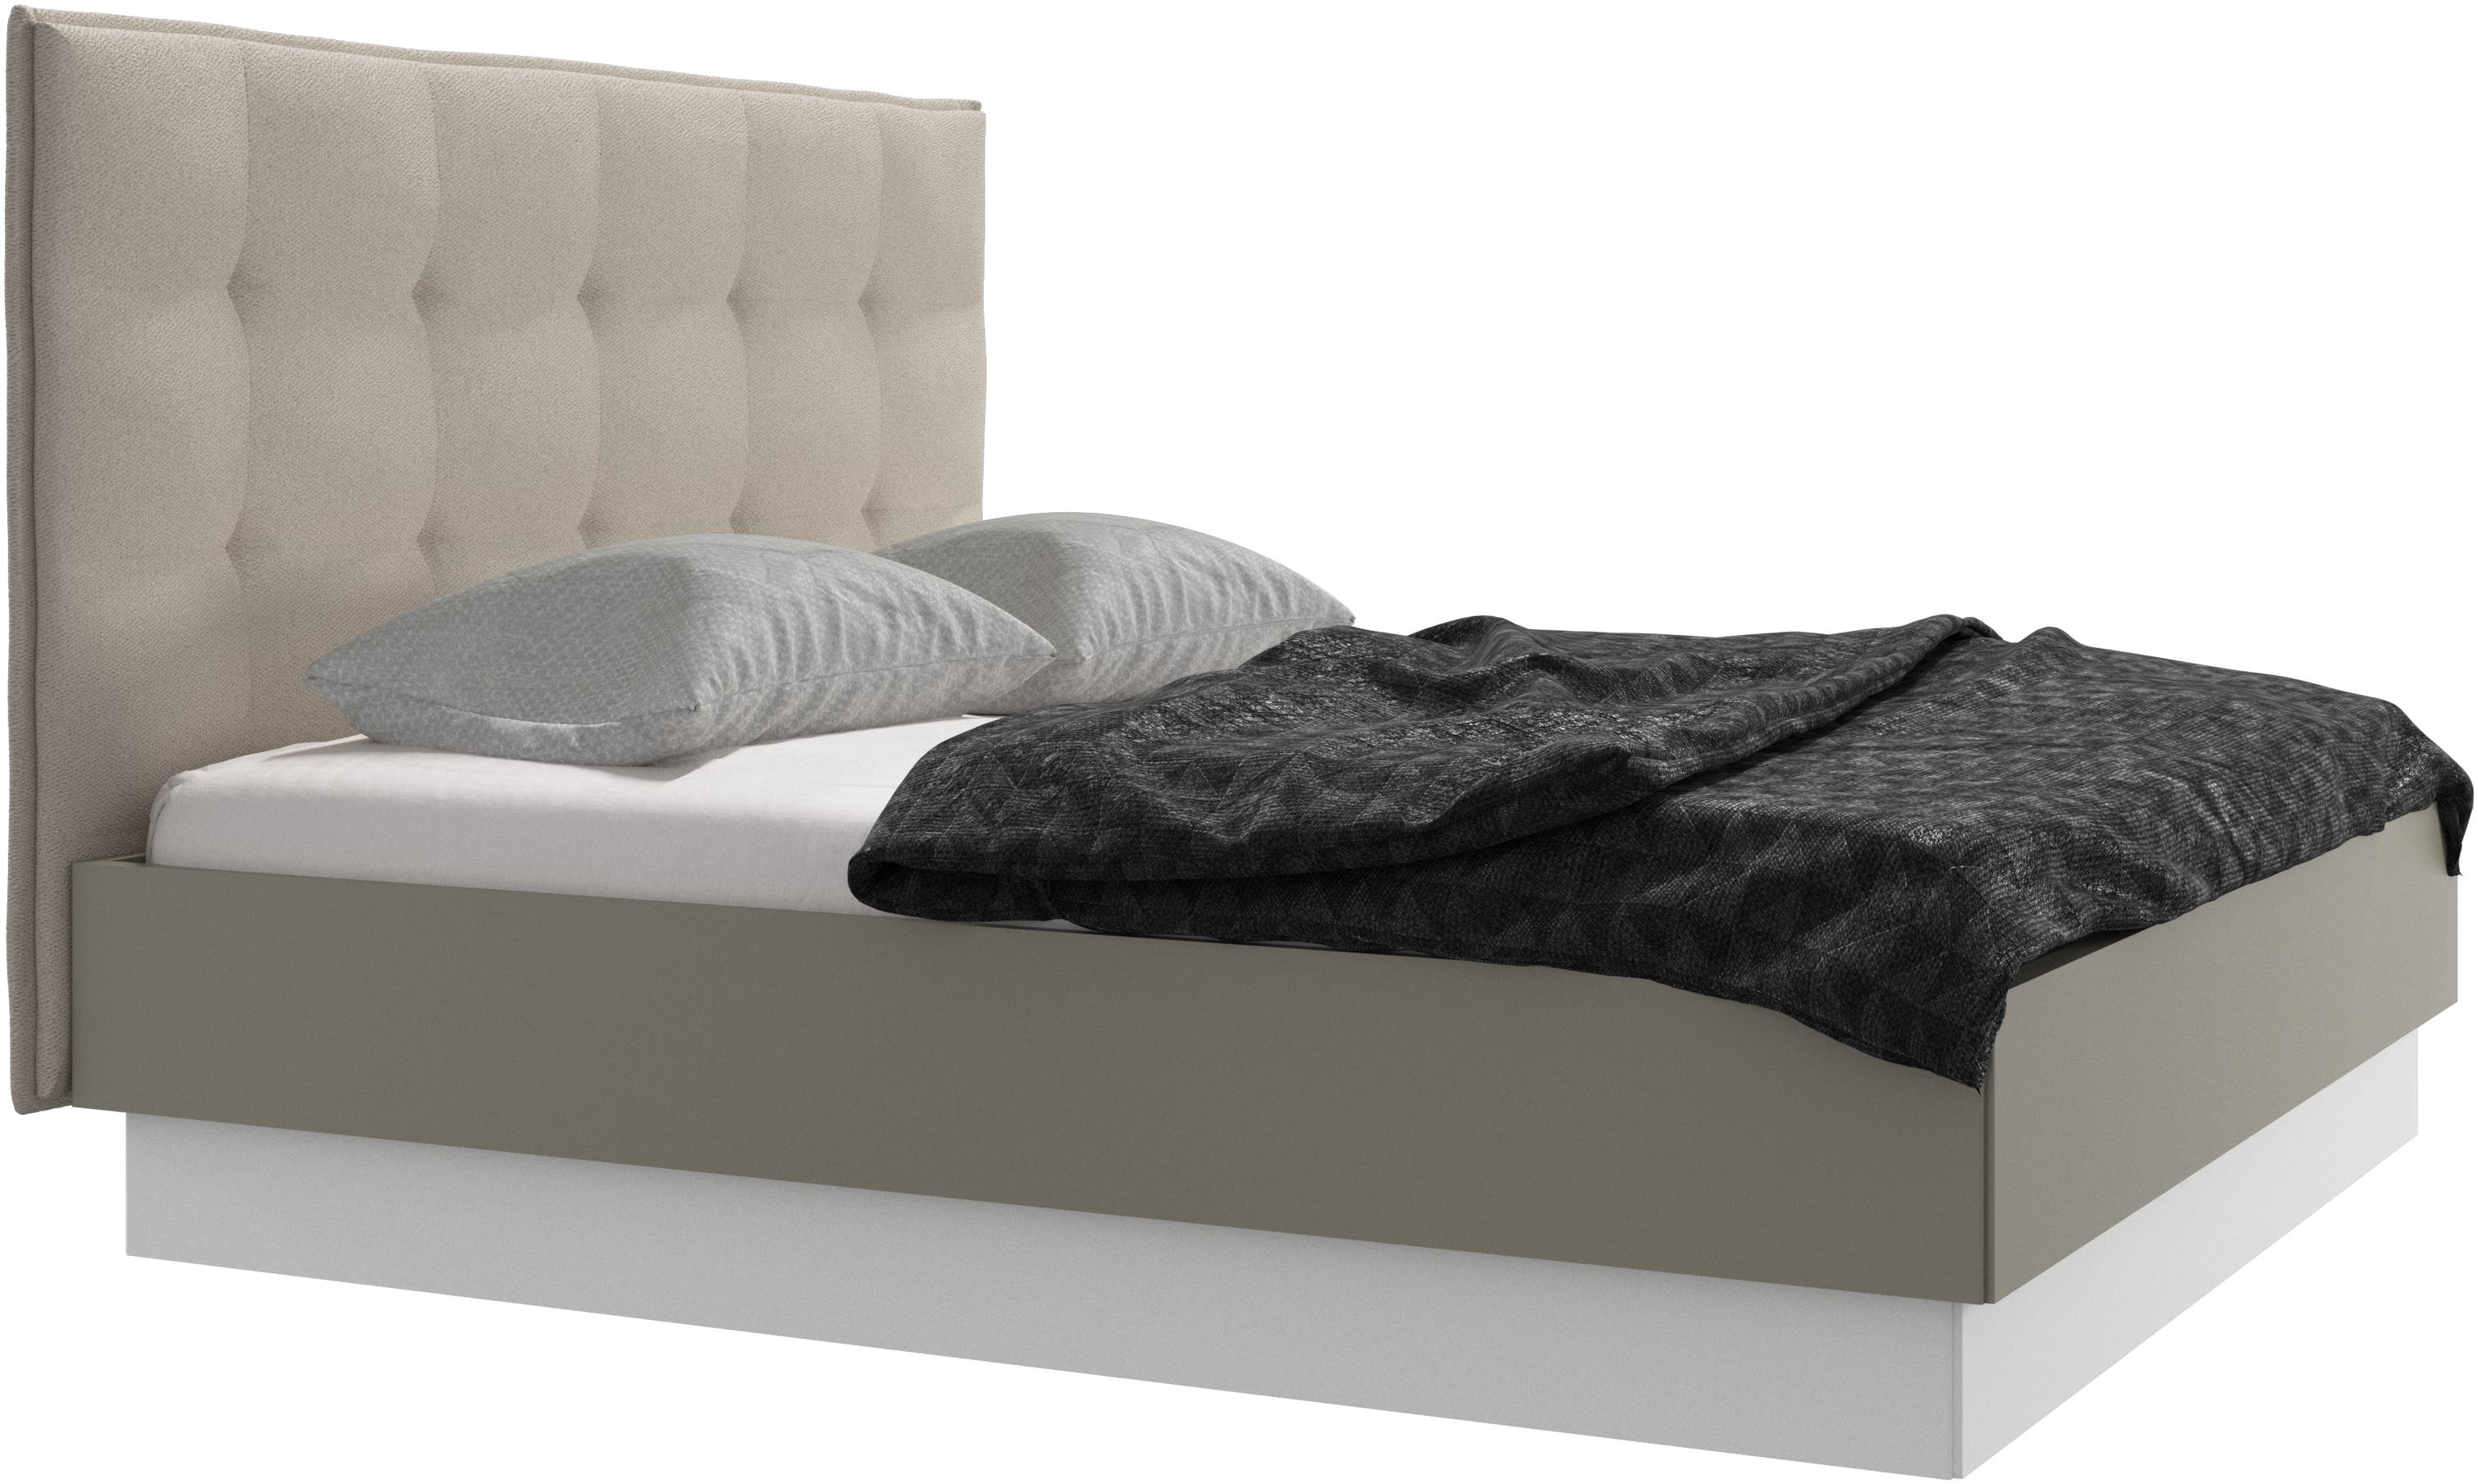 Lugano storage bed with lift-up frame and slats, excl. mattress